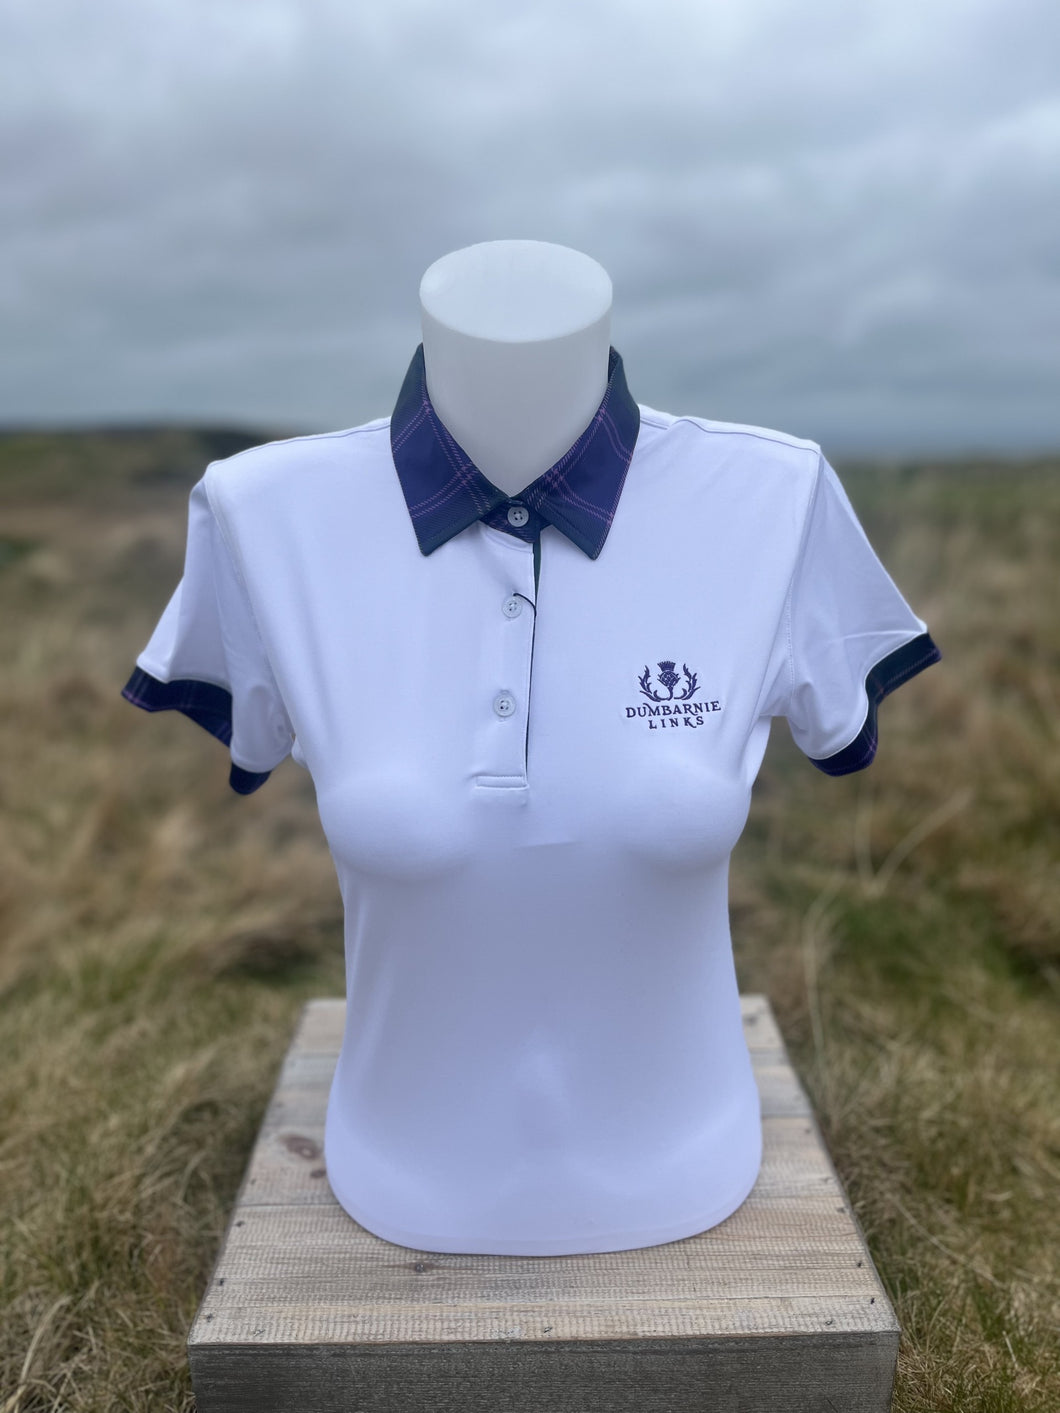 Dumbarnie Collection - Ladies Pique Polo W/ Tartan Collar - Mix and Match - 2 for £100!